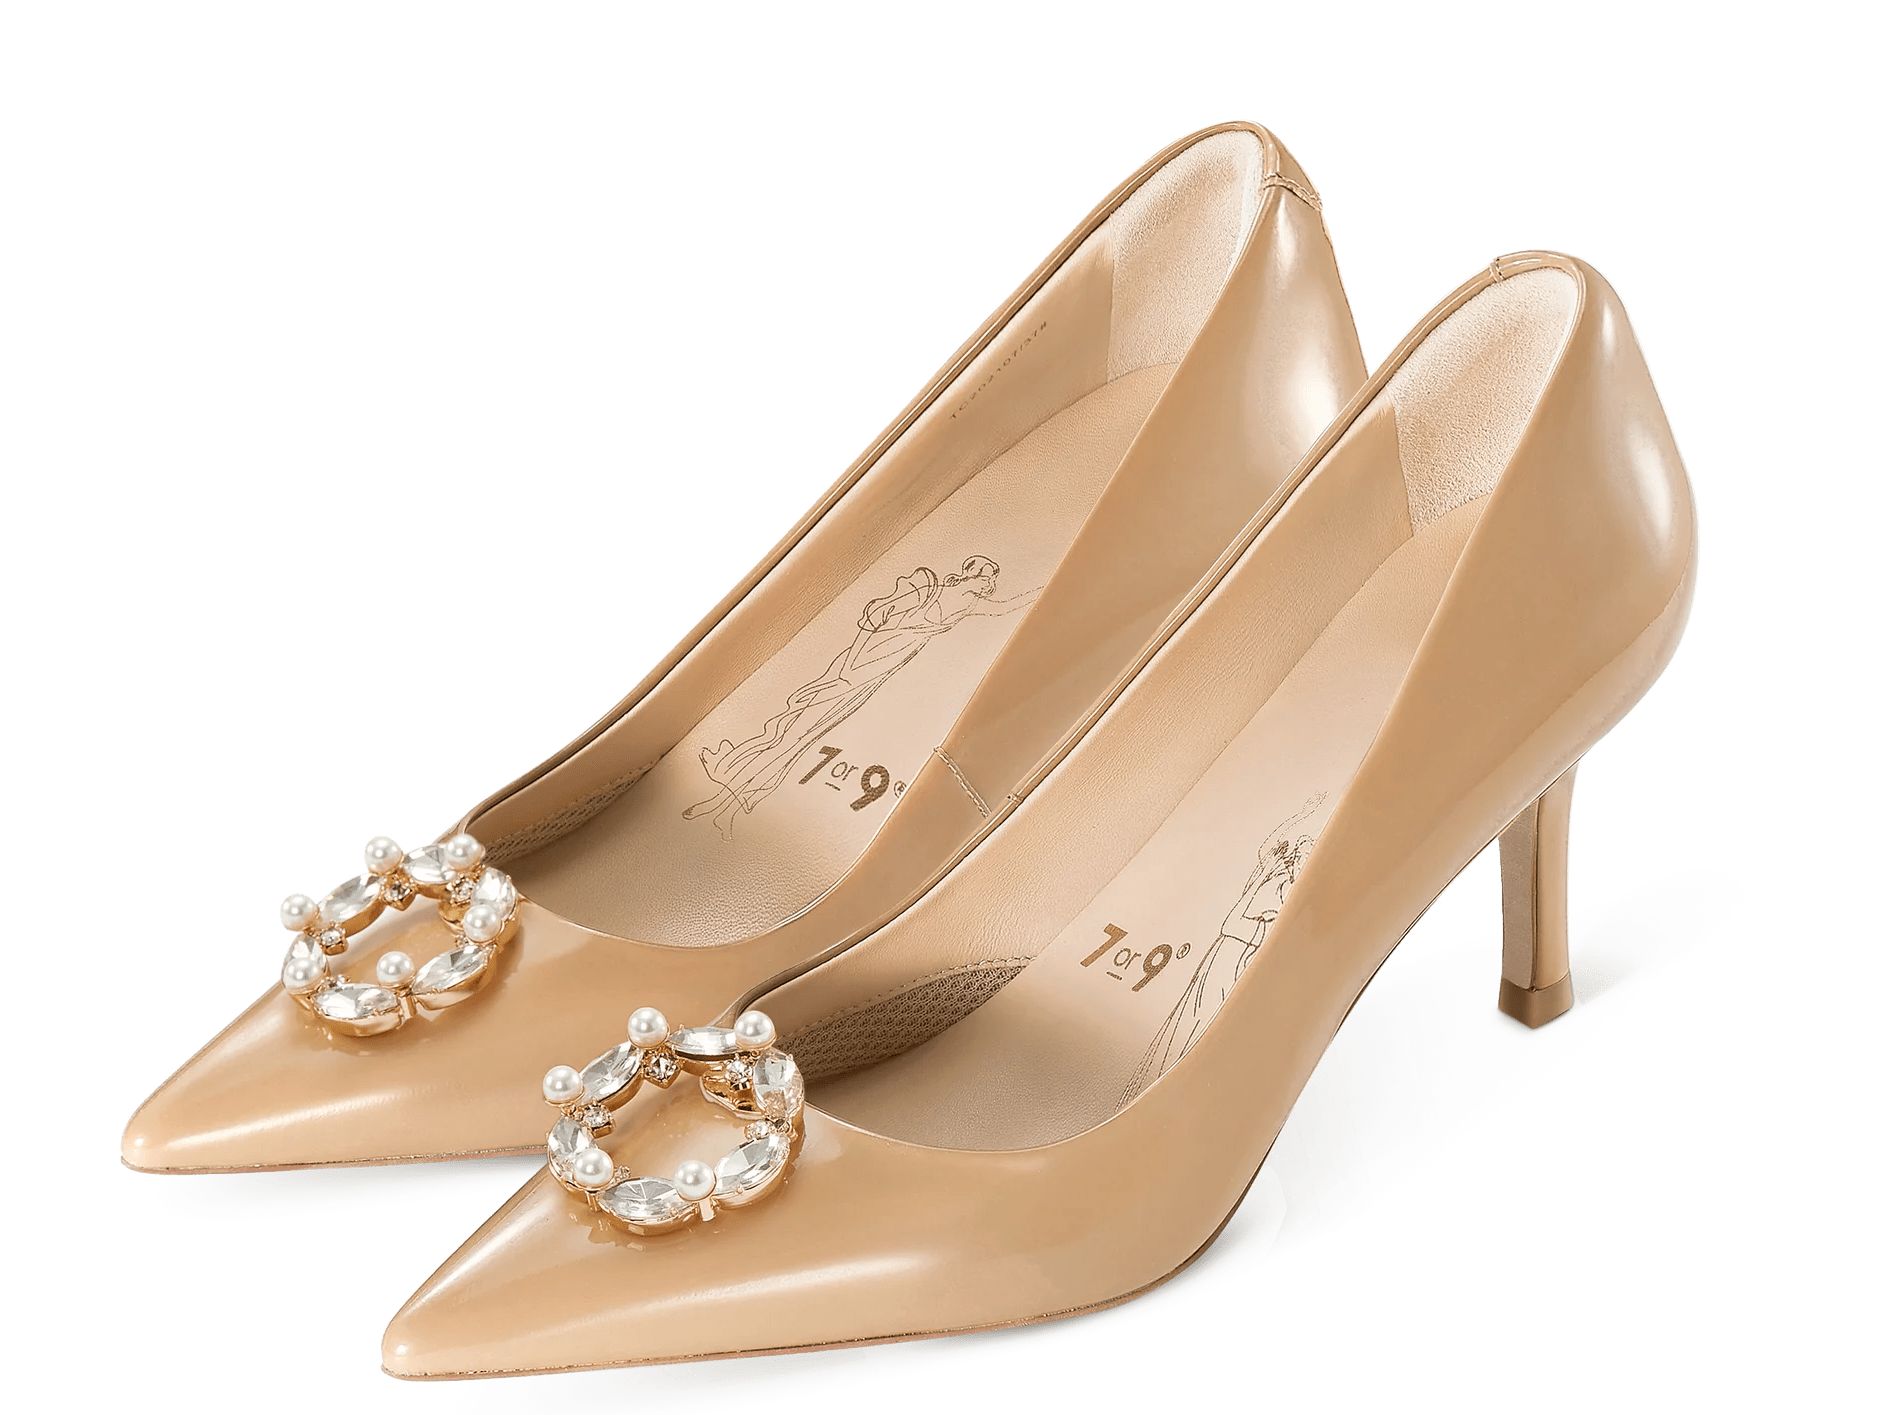 Comfort Heels for Women: How to Choose the Perfect Pair - 7or9